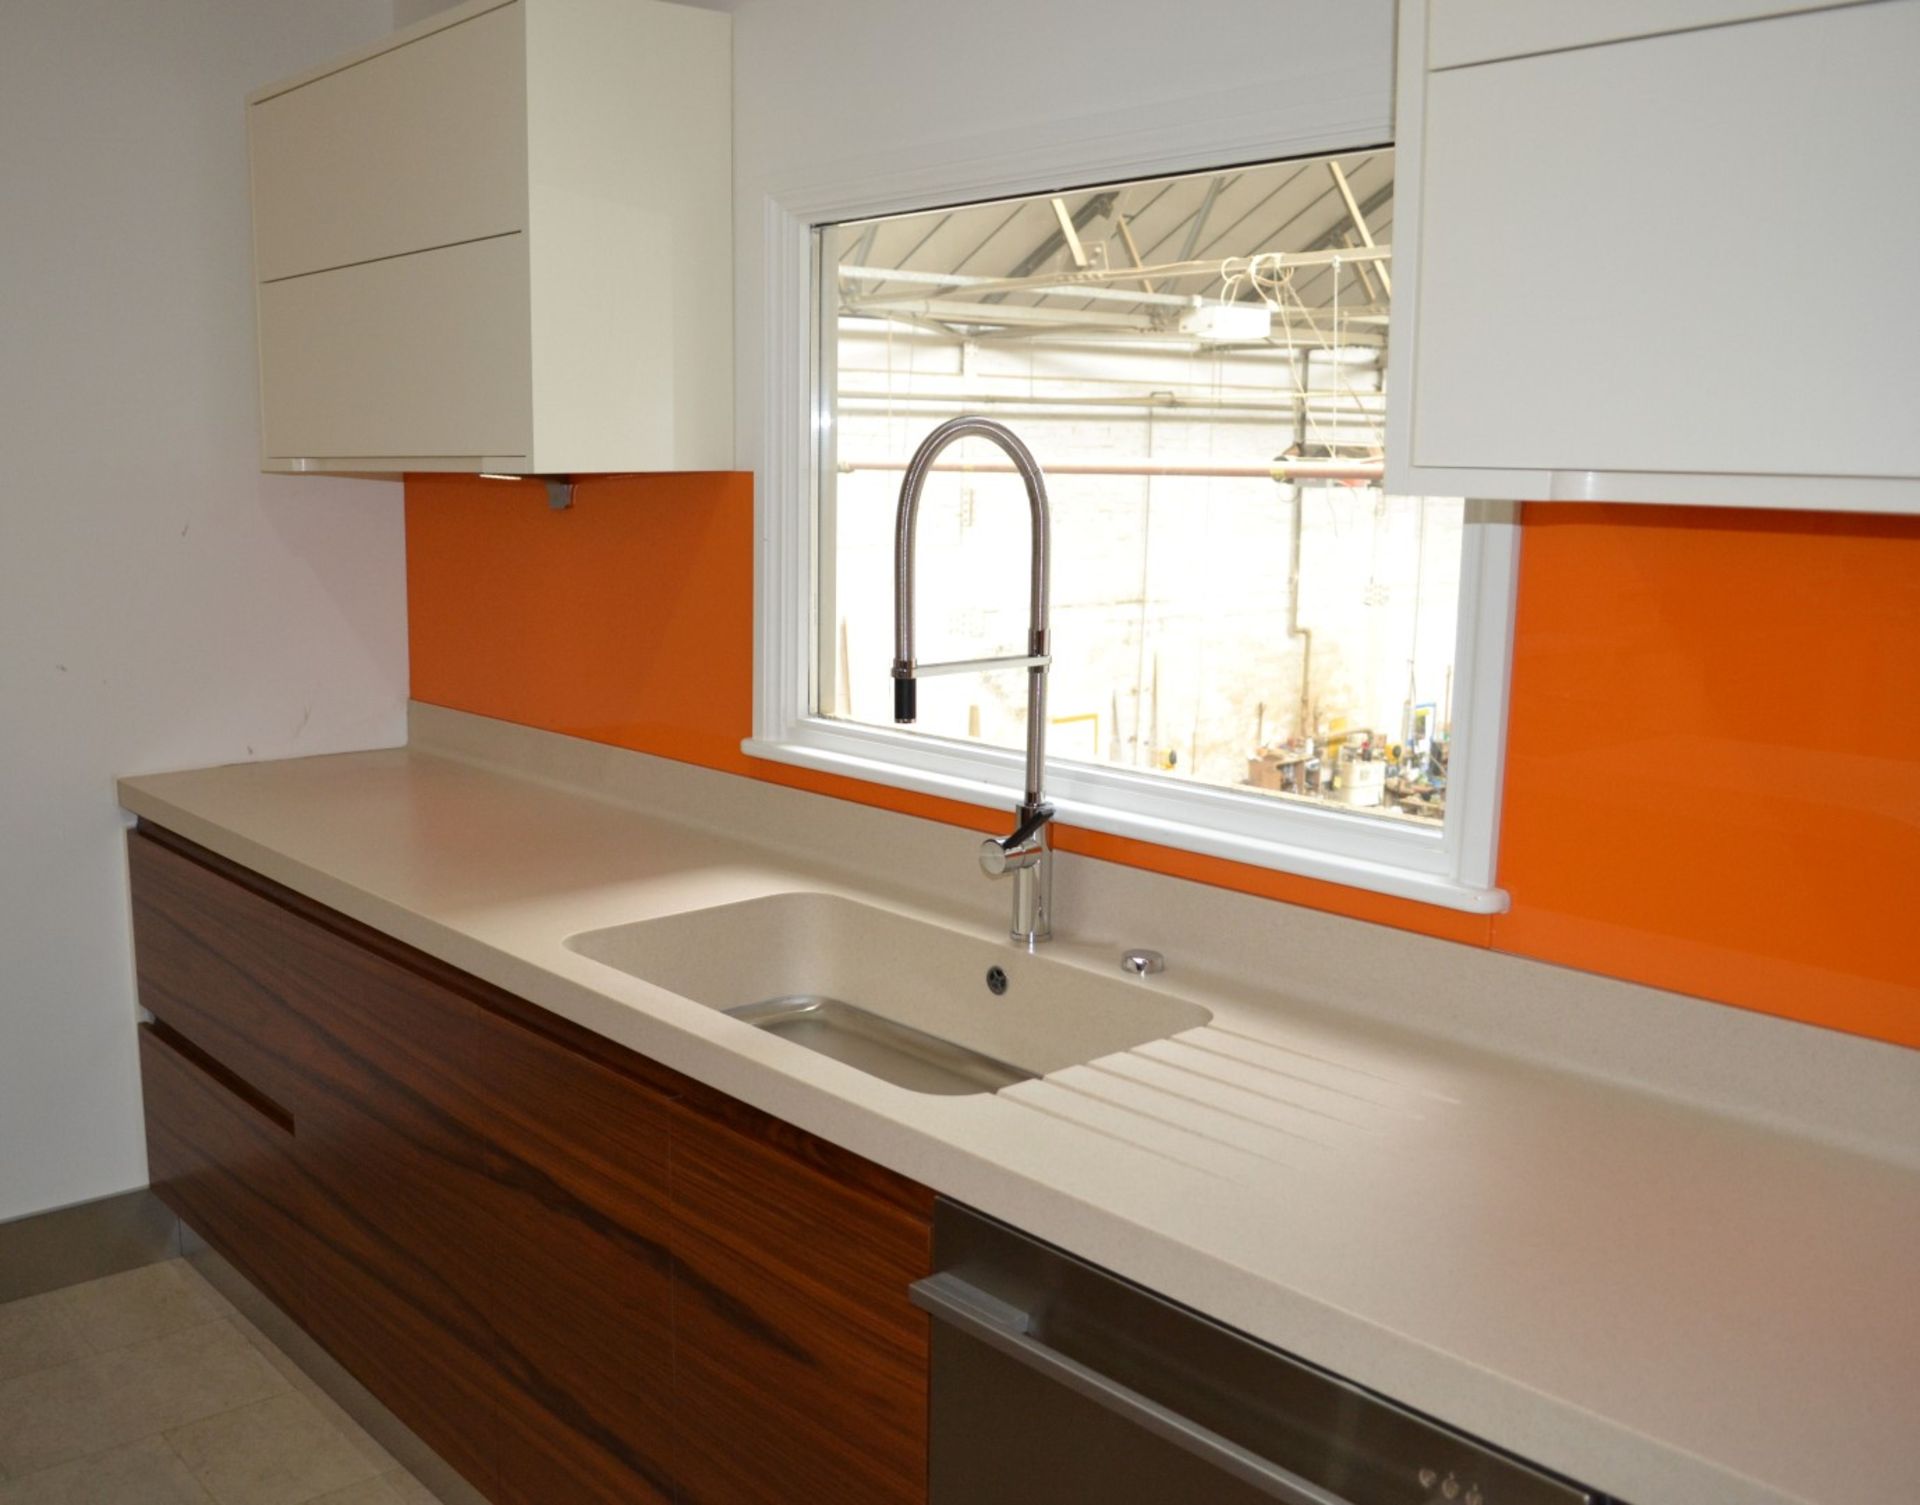 1 x Unused Bespoke Display Kitchen in Perfect Condition - Includes Unused Neff and Fisher & Paykel - Image 14 of 60